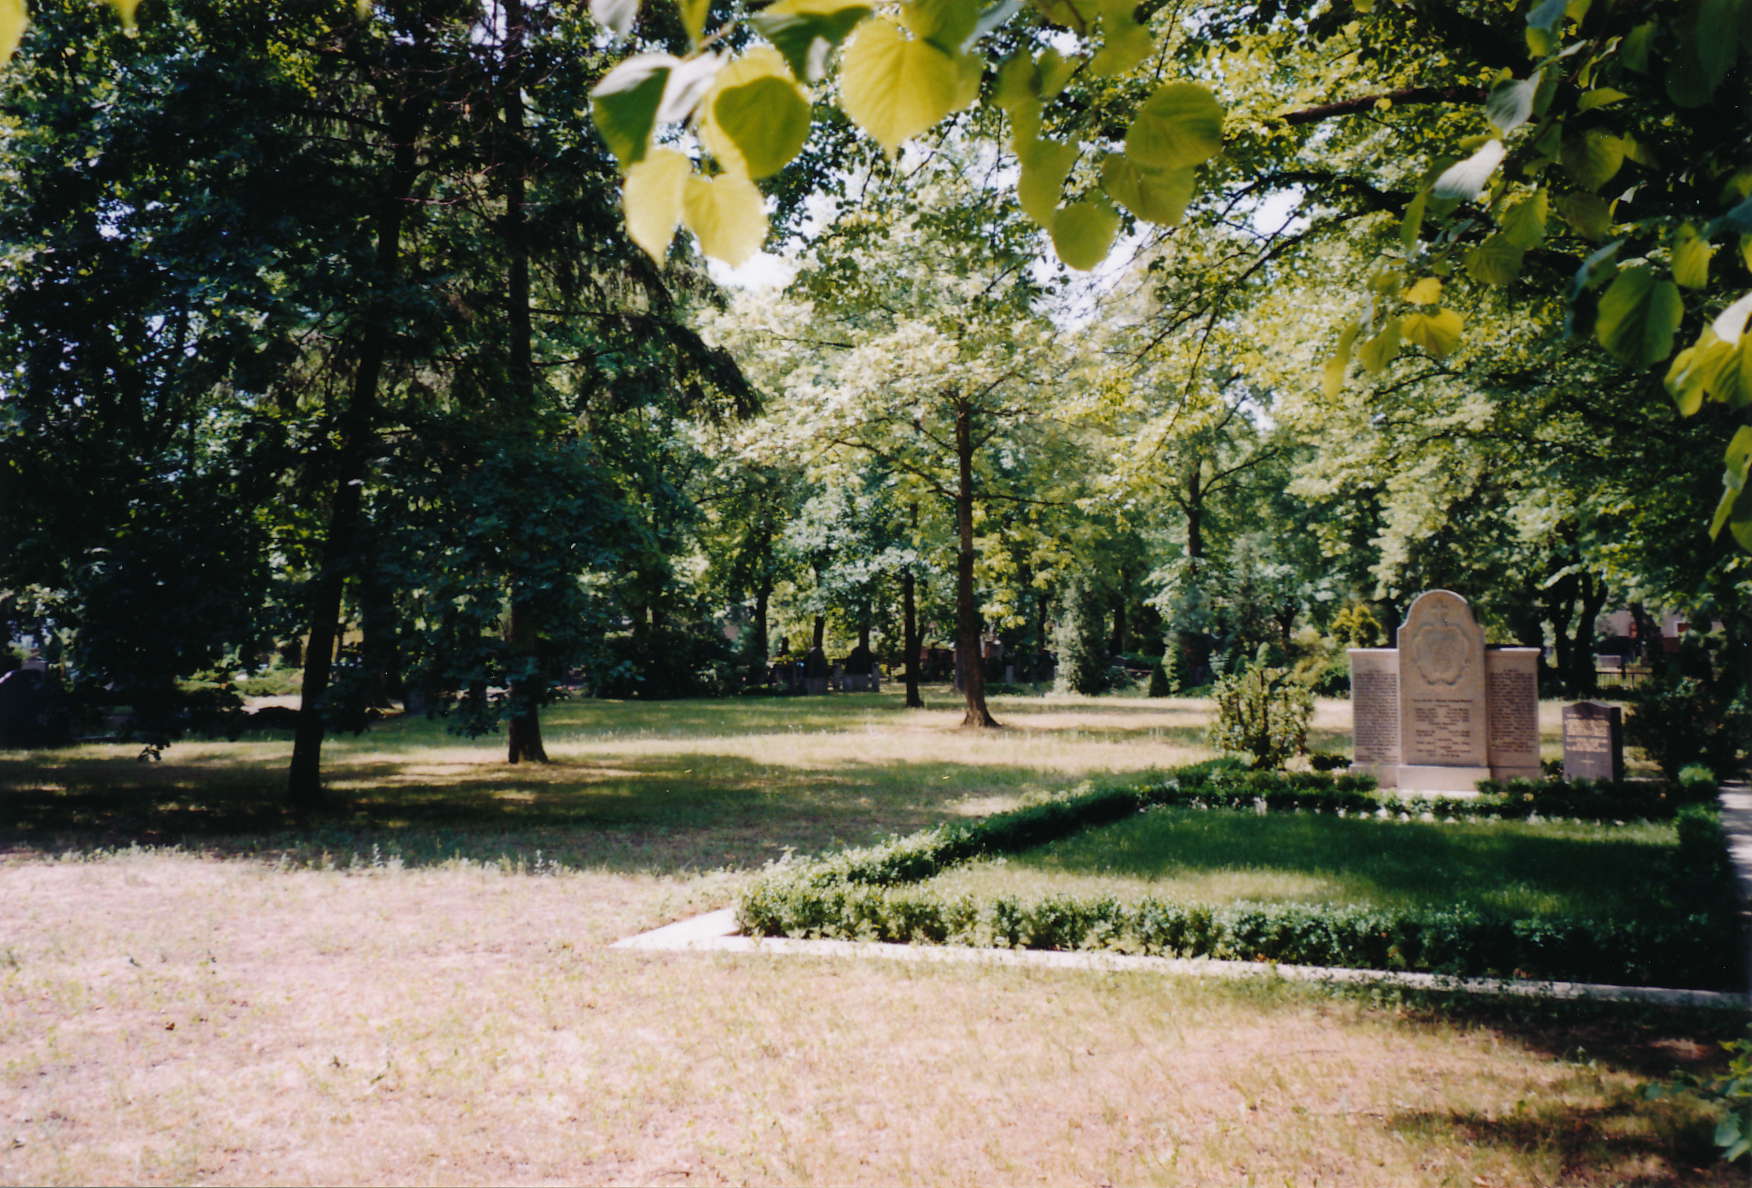 The cemeterys‘ burial ground for war victims